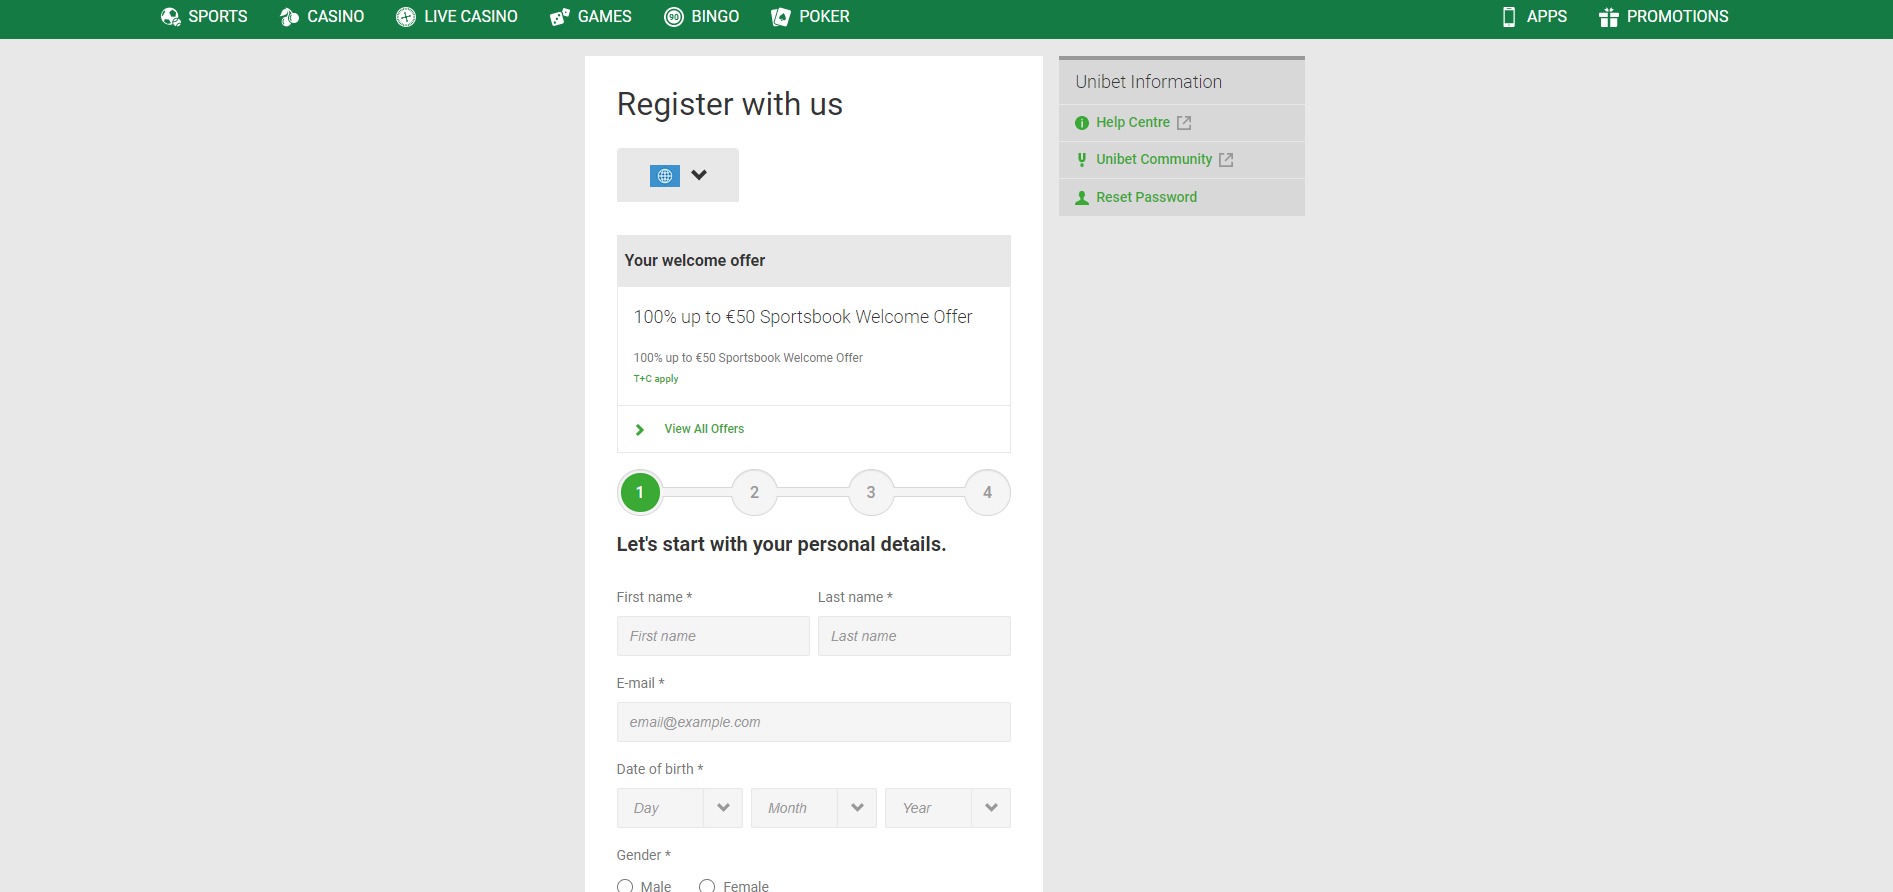 Registration menu and start of bets in Unibet